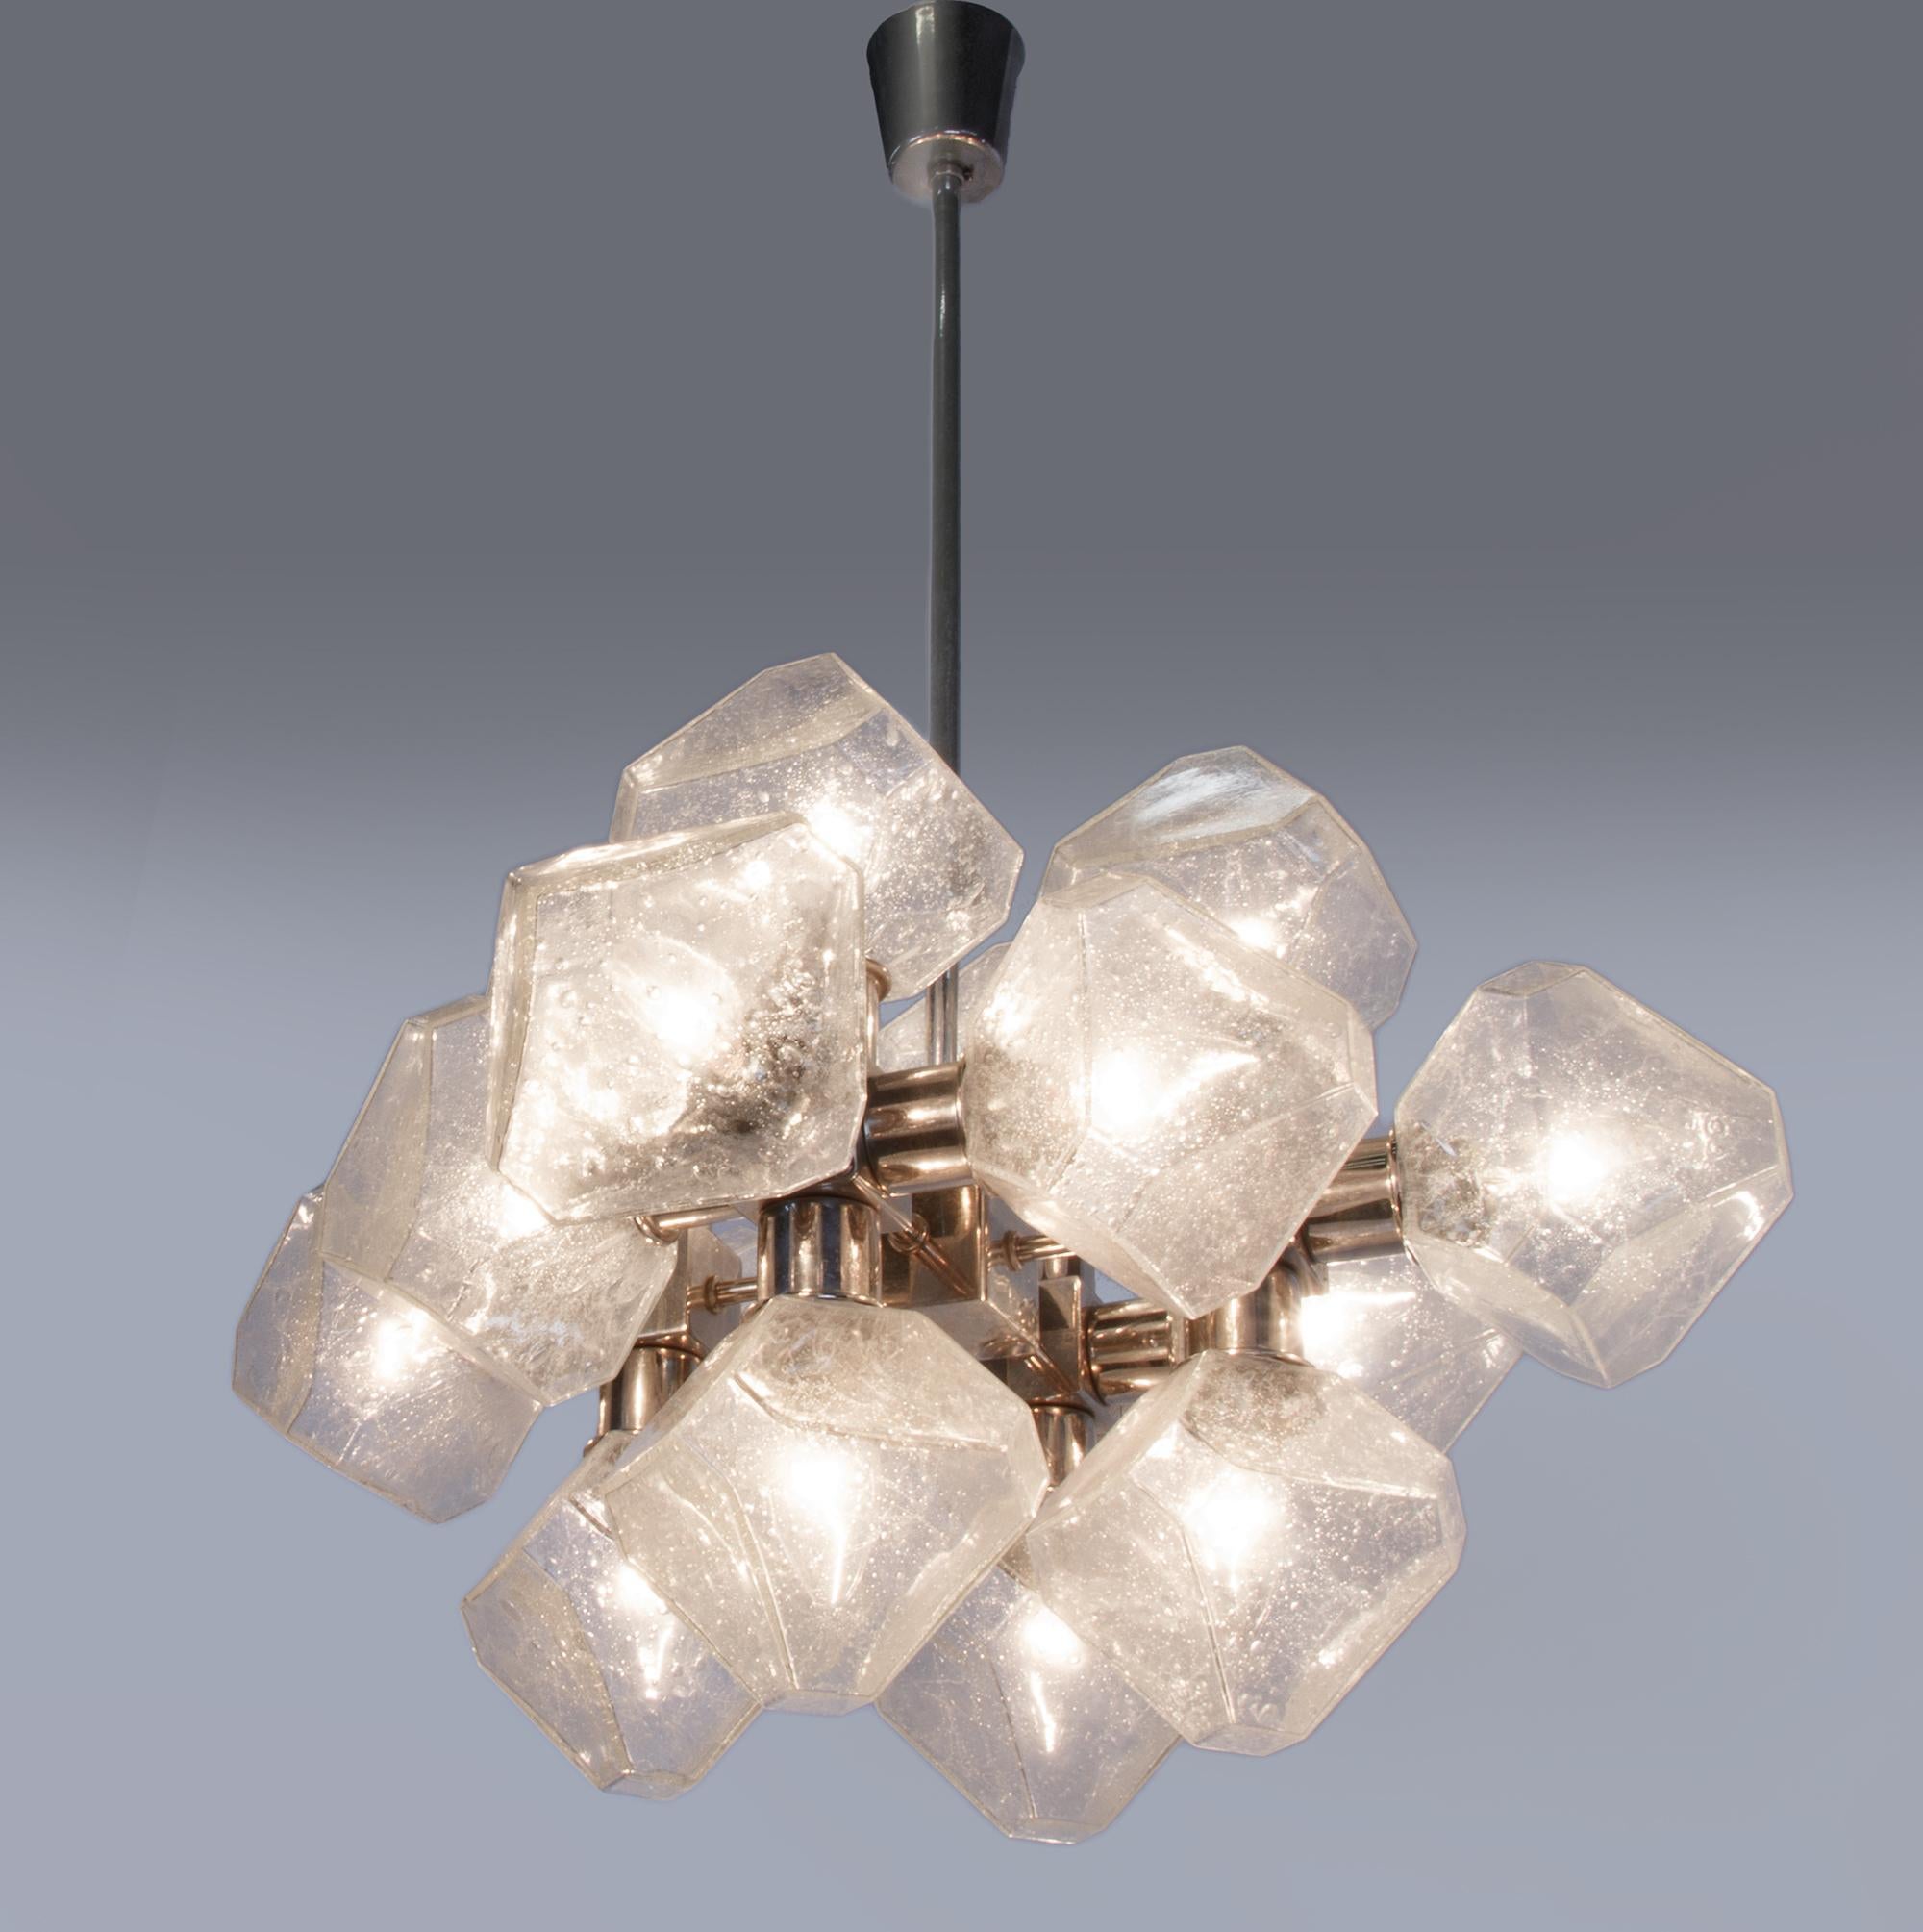 Elegant high quality chandelier with 16 cubist glass bodies on a chromed frame. The chandelier is made of chrome-plated metal and very nicely shaped glass. The clear glass has small air inclusions. Gem from the time. With this light you make a clear